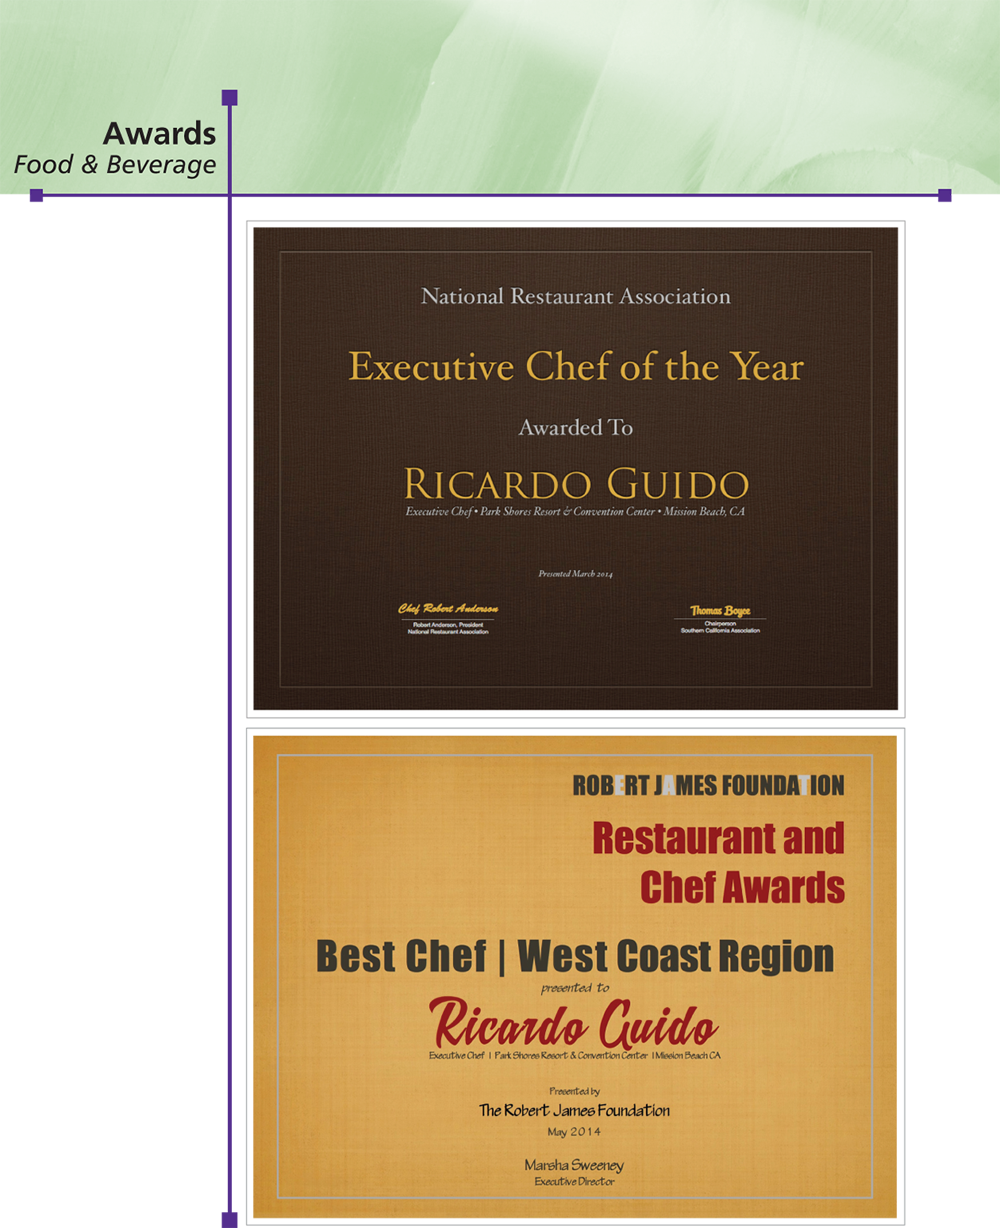 A page titled “Awards; Food & Beverage” shows a set of two certificates.